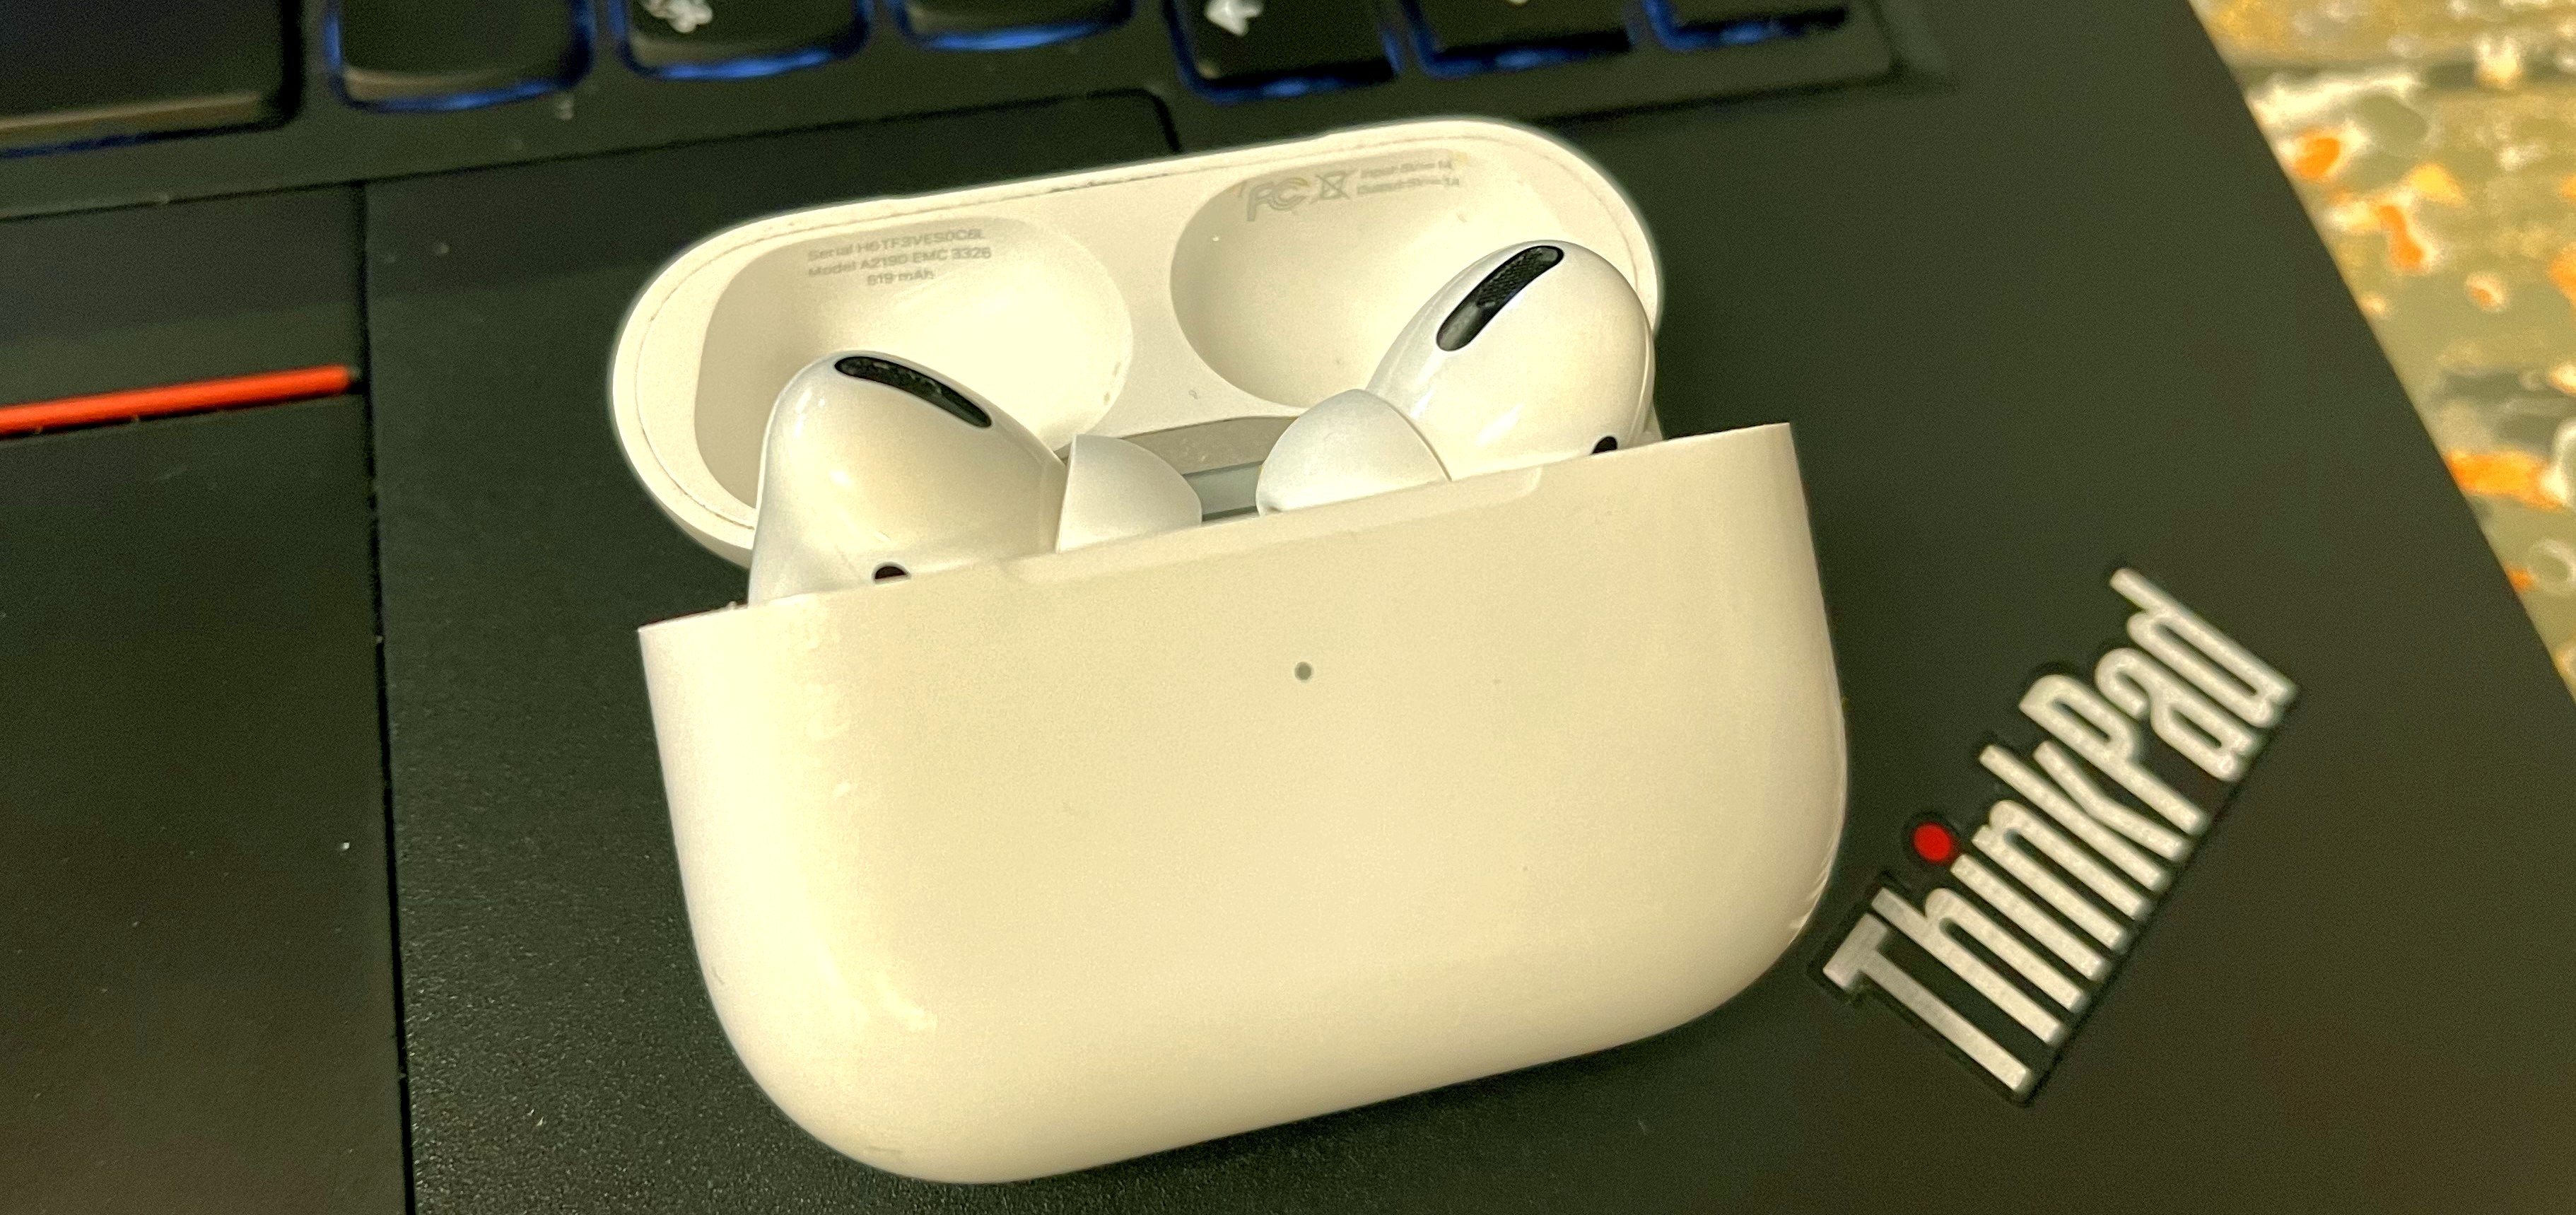 A set of AirPods sitting on a laptop